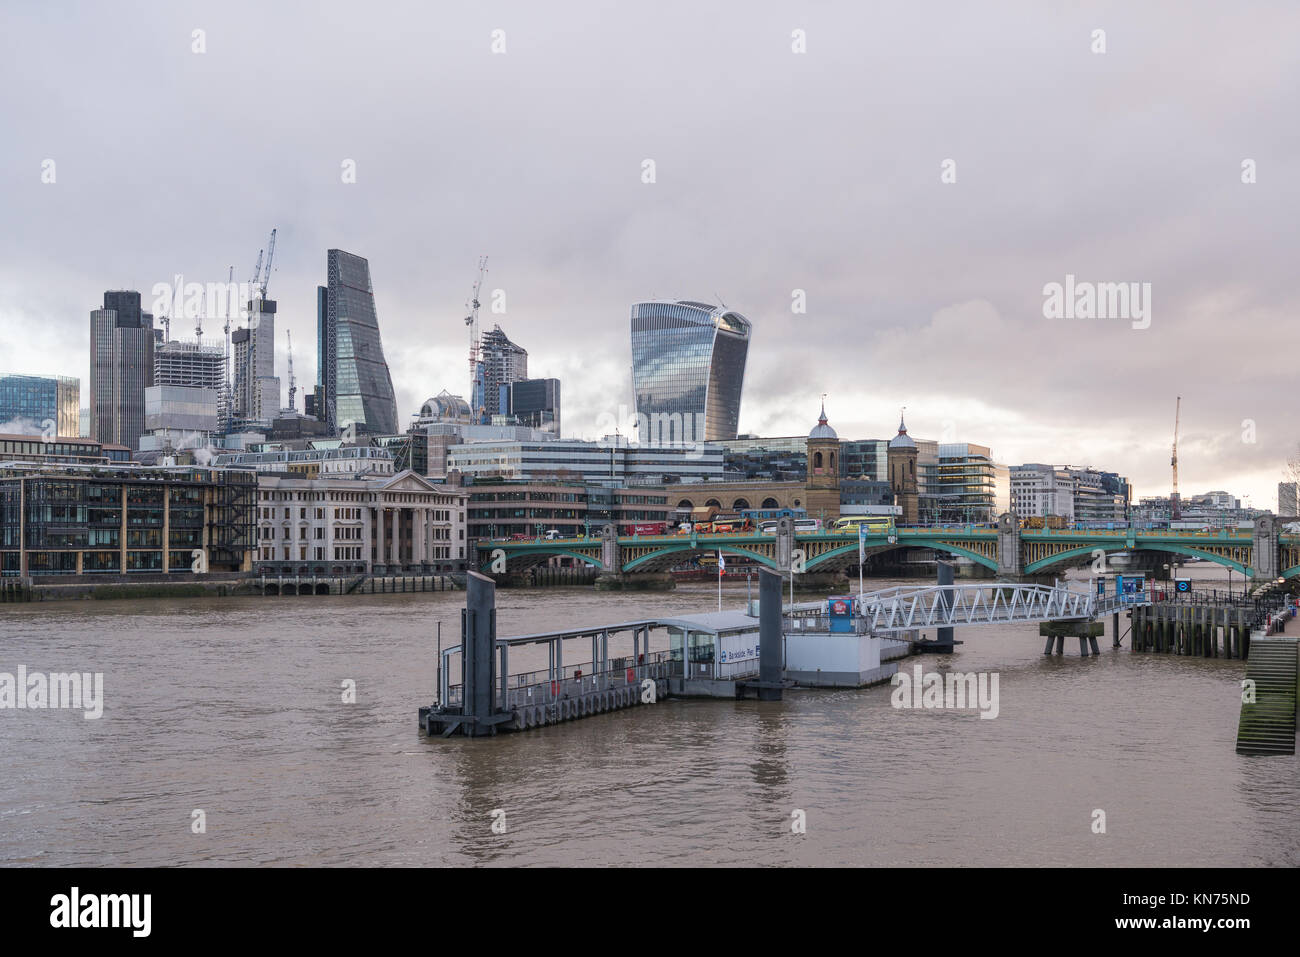 View across the River Thames towards the City of London as seen from the south bank, London, England, UK. Stock Photo